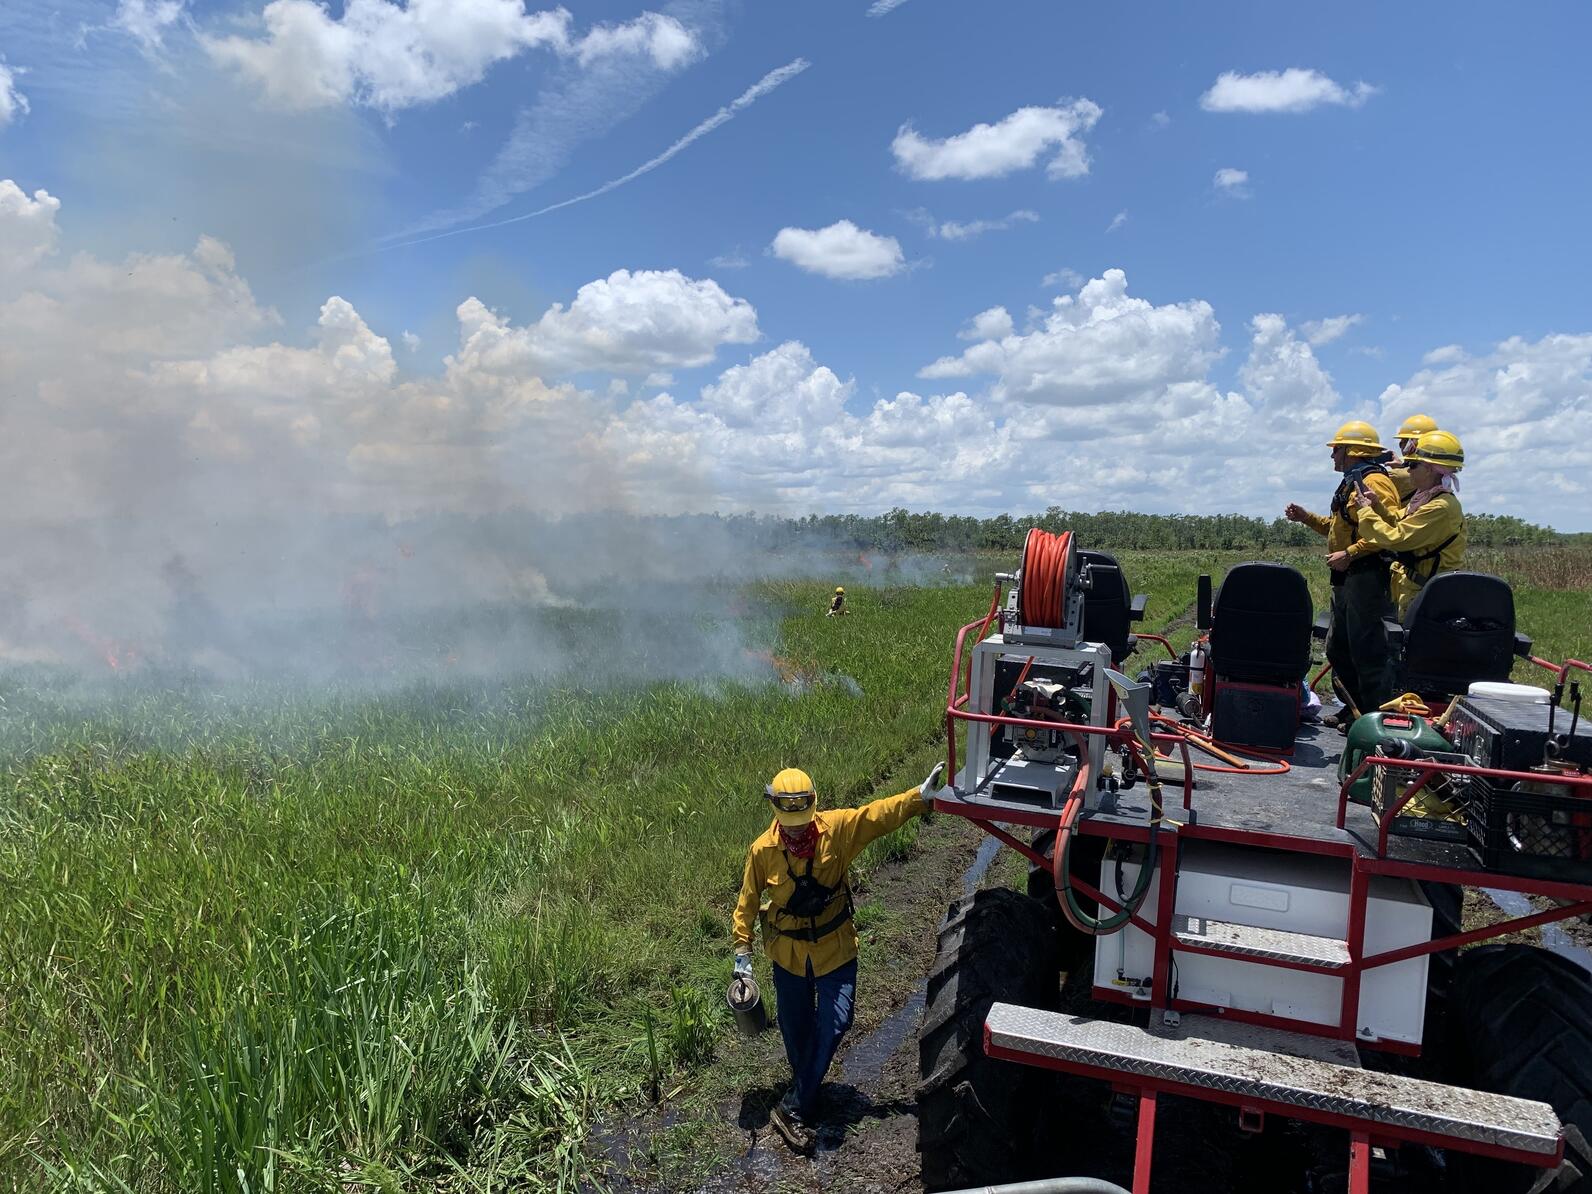 A person in yellow protective gear stands in front of a field with smoke in the near distance. Beside the person, a trio of other people stand atop a swamp buggy.